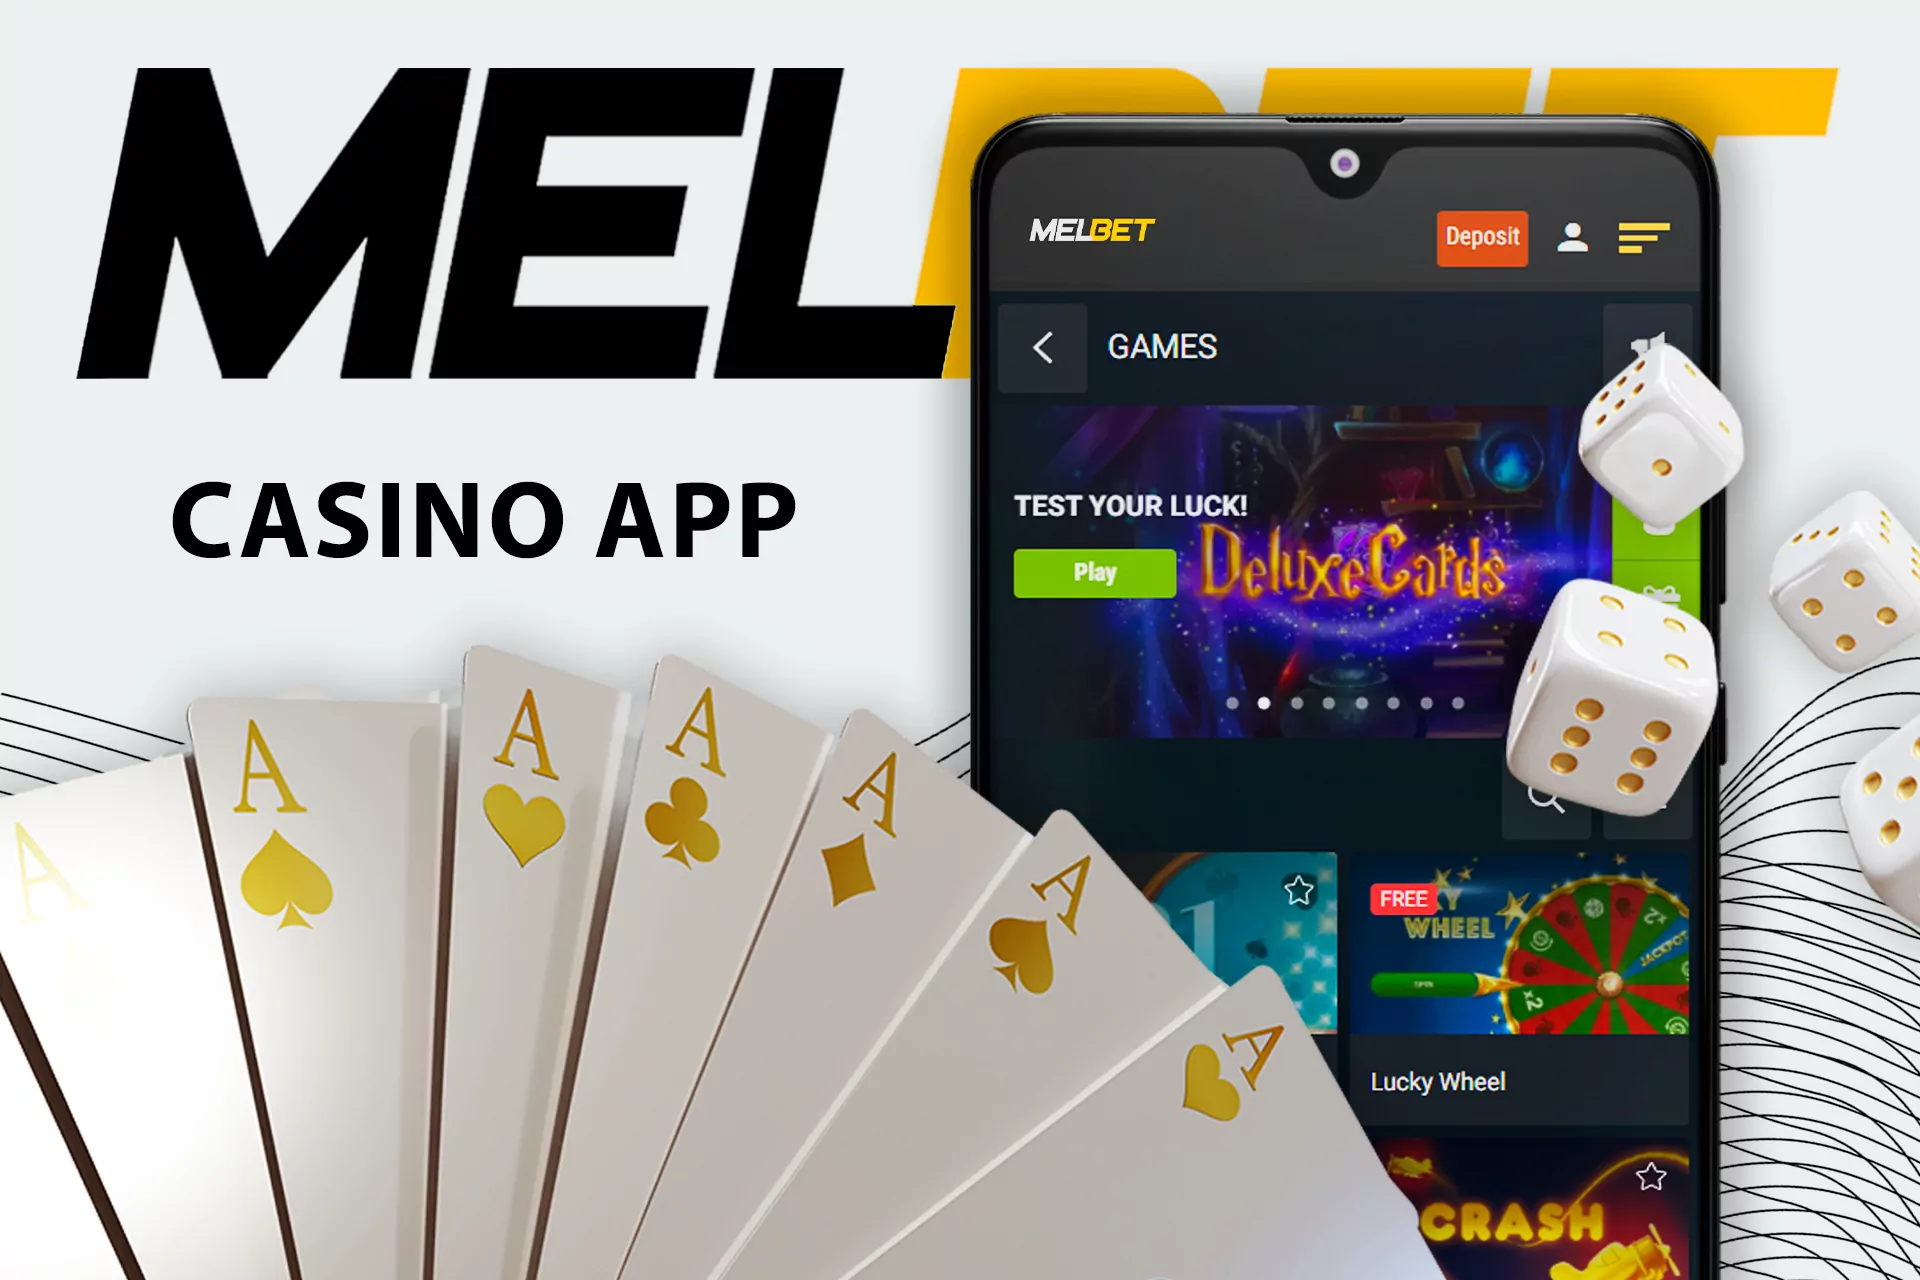 In the Melbet app, you also can play slots and other casino games from your account.